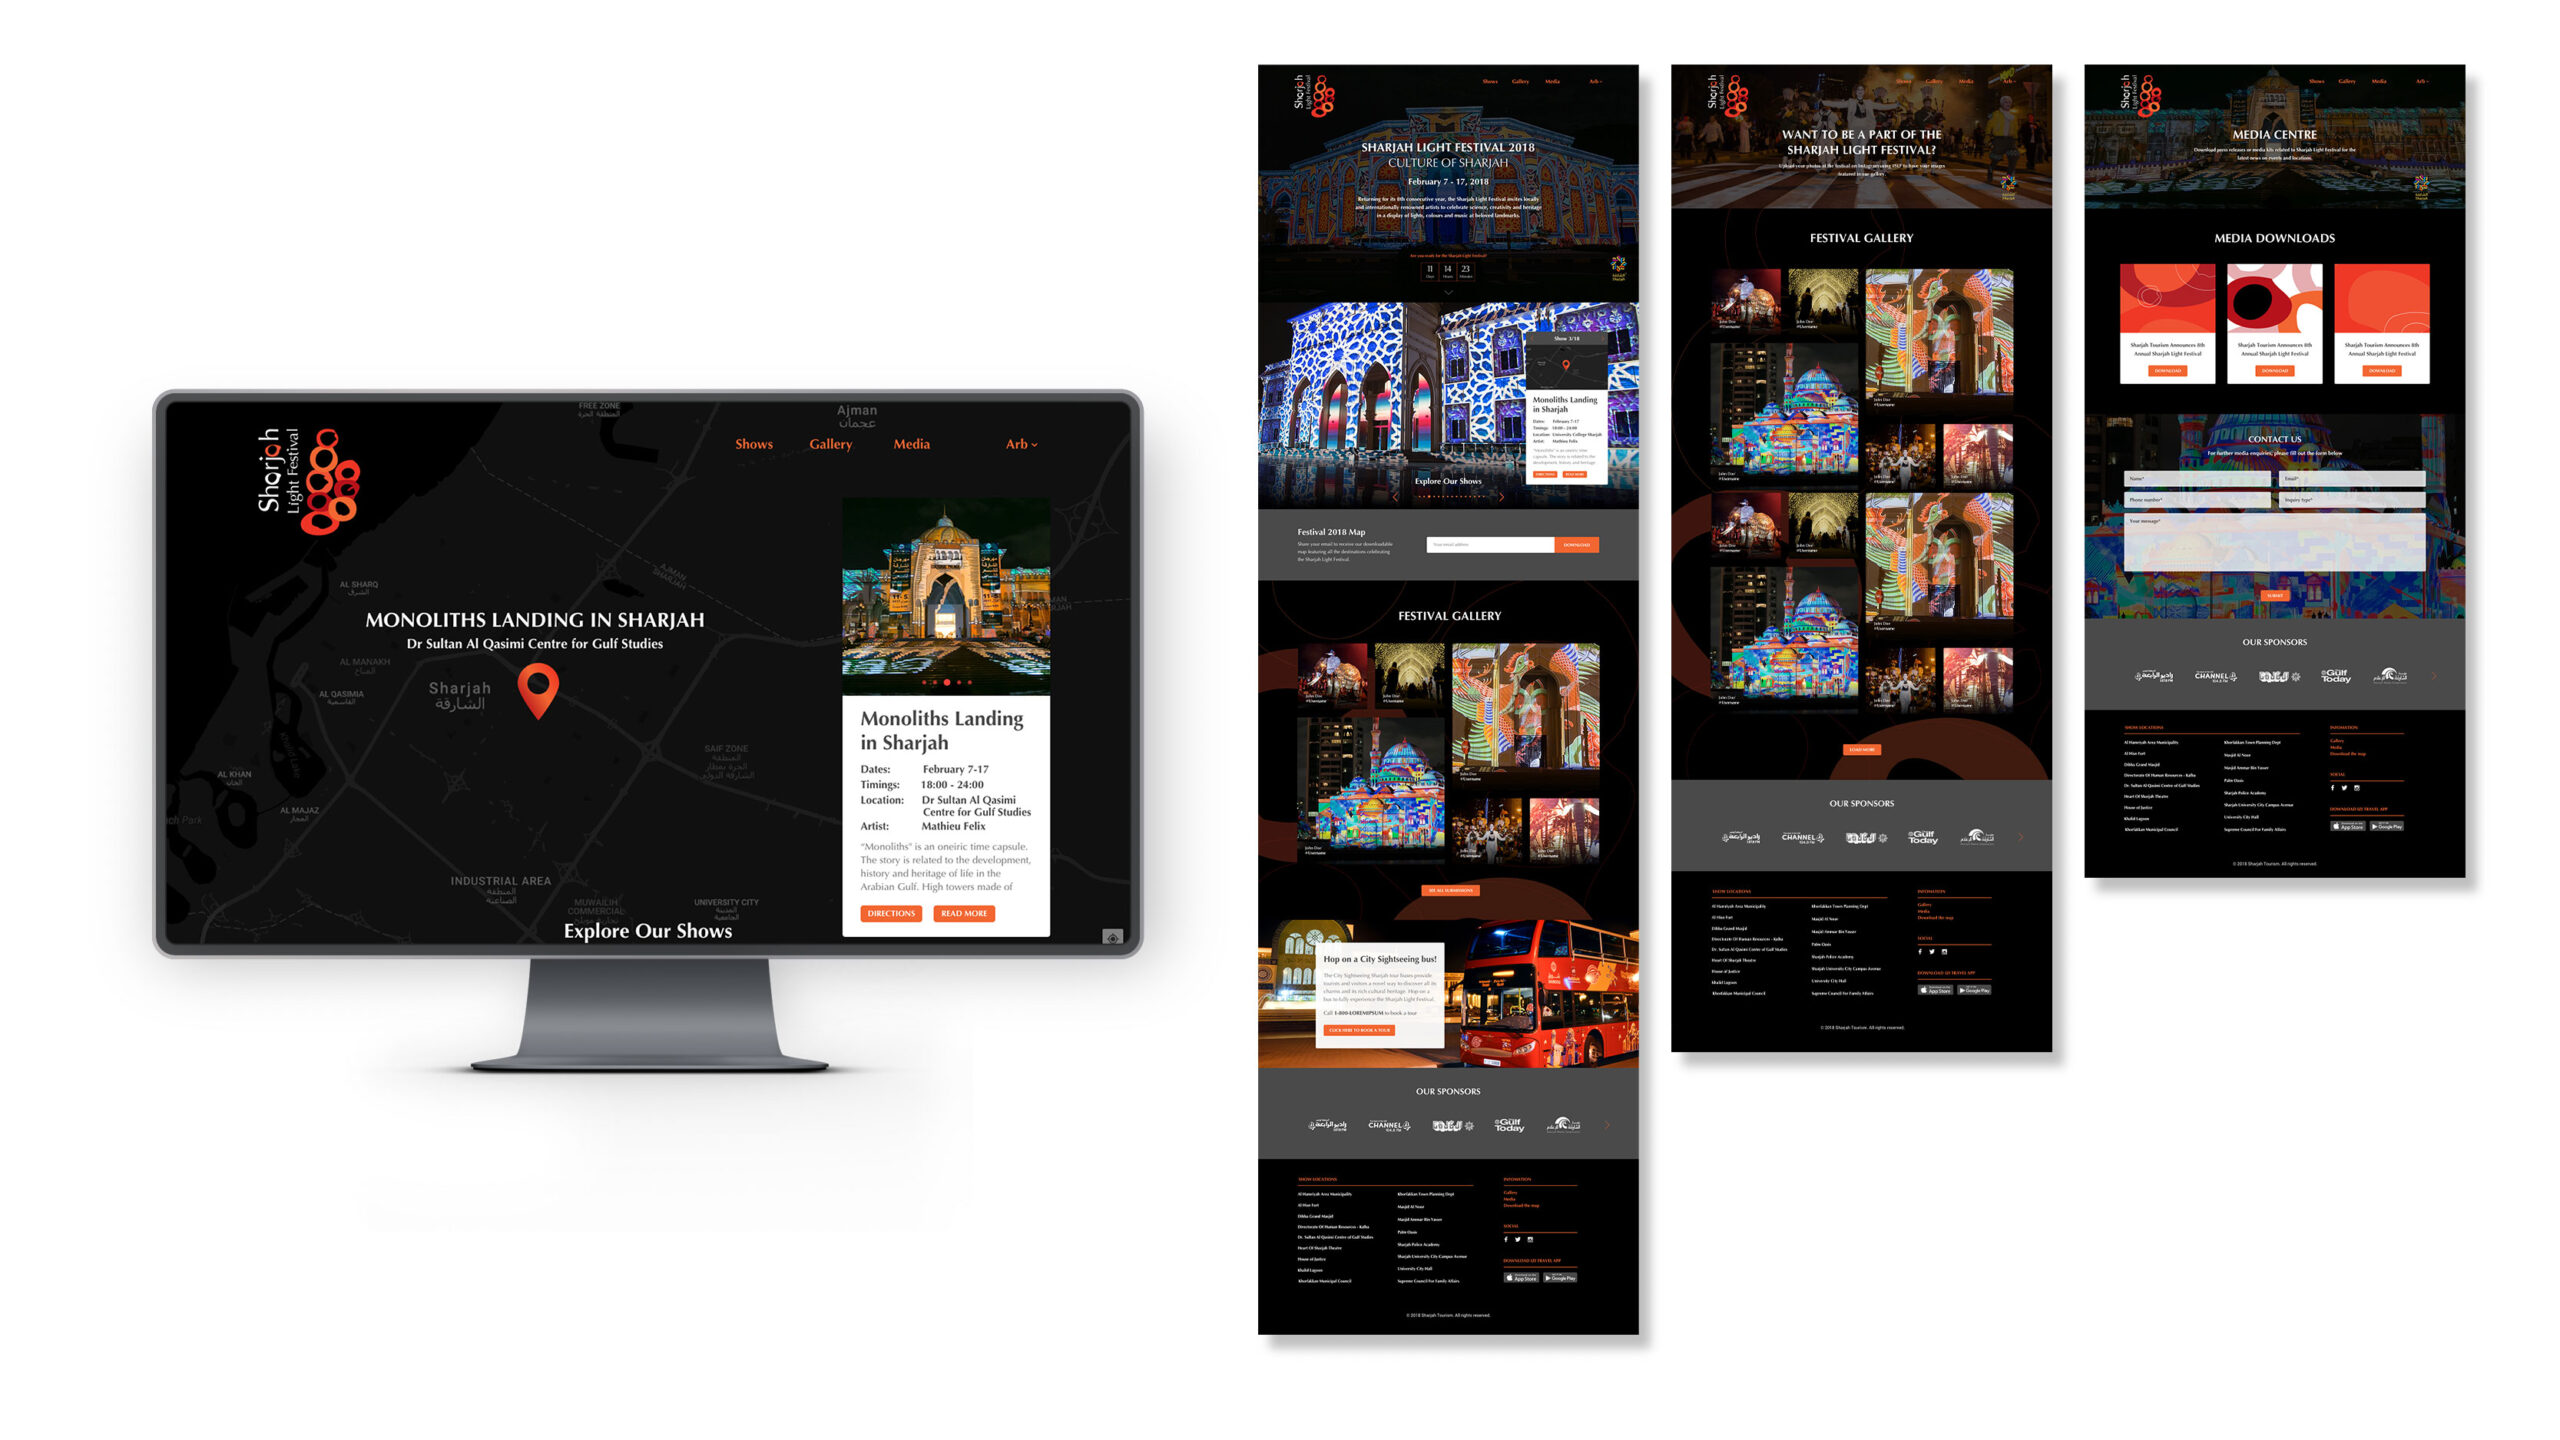 Examples of pages created to allow third-party tourism partners to add and manage content for their own hotels, restaurants, activities, and promotions.